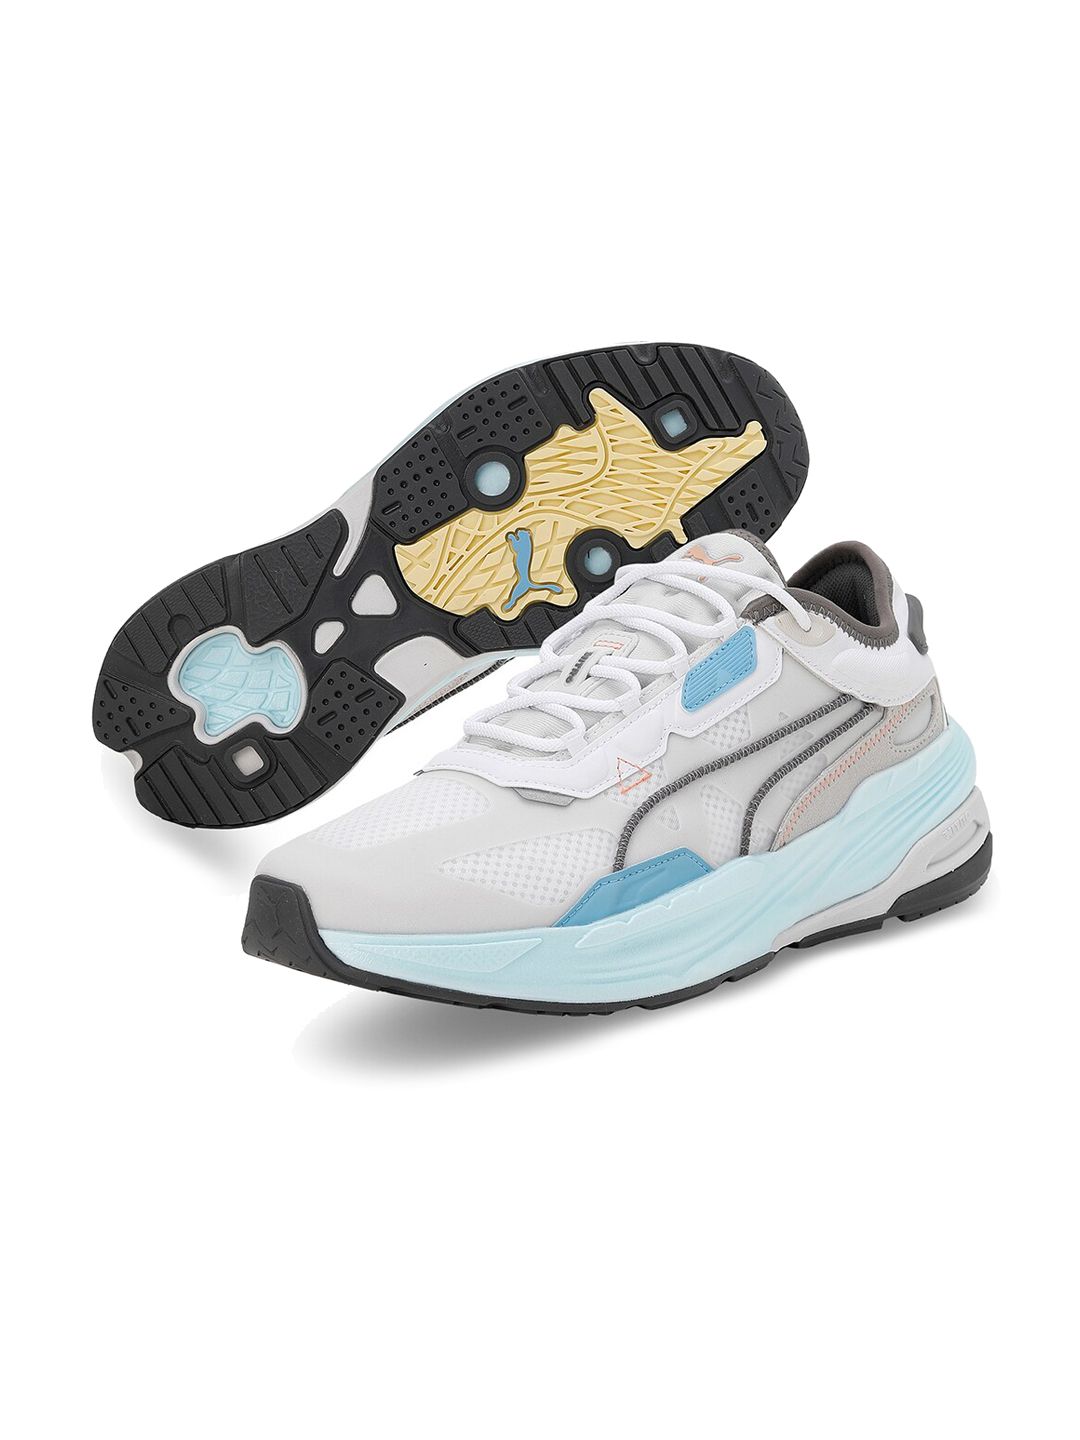 Puma White Colourblocked Leather Sneakers Price in India